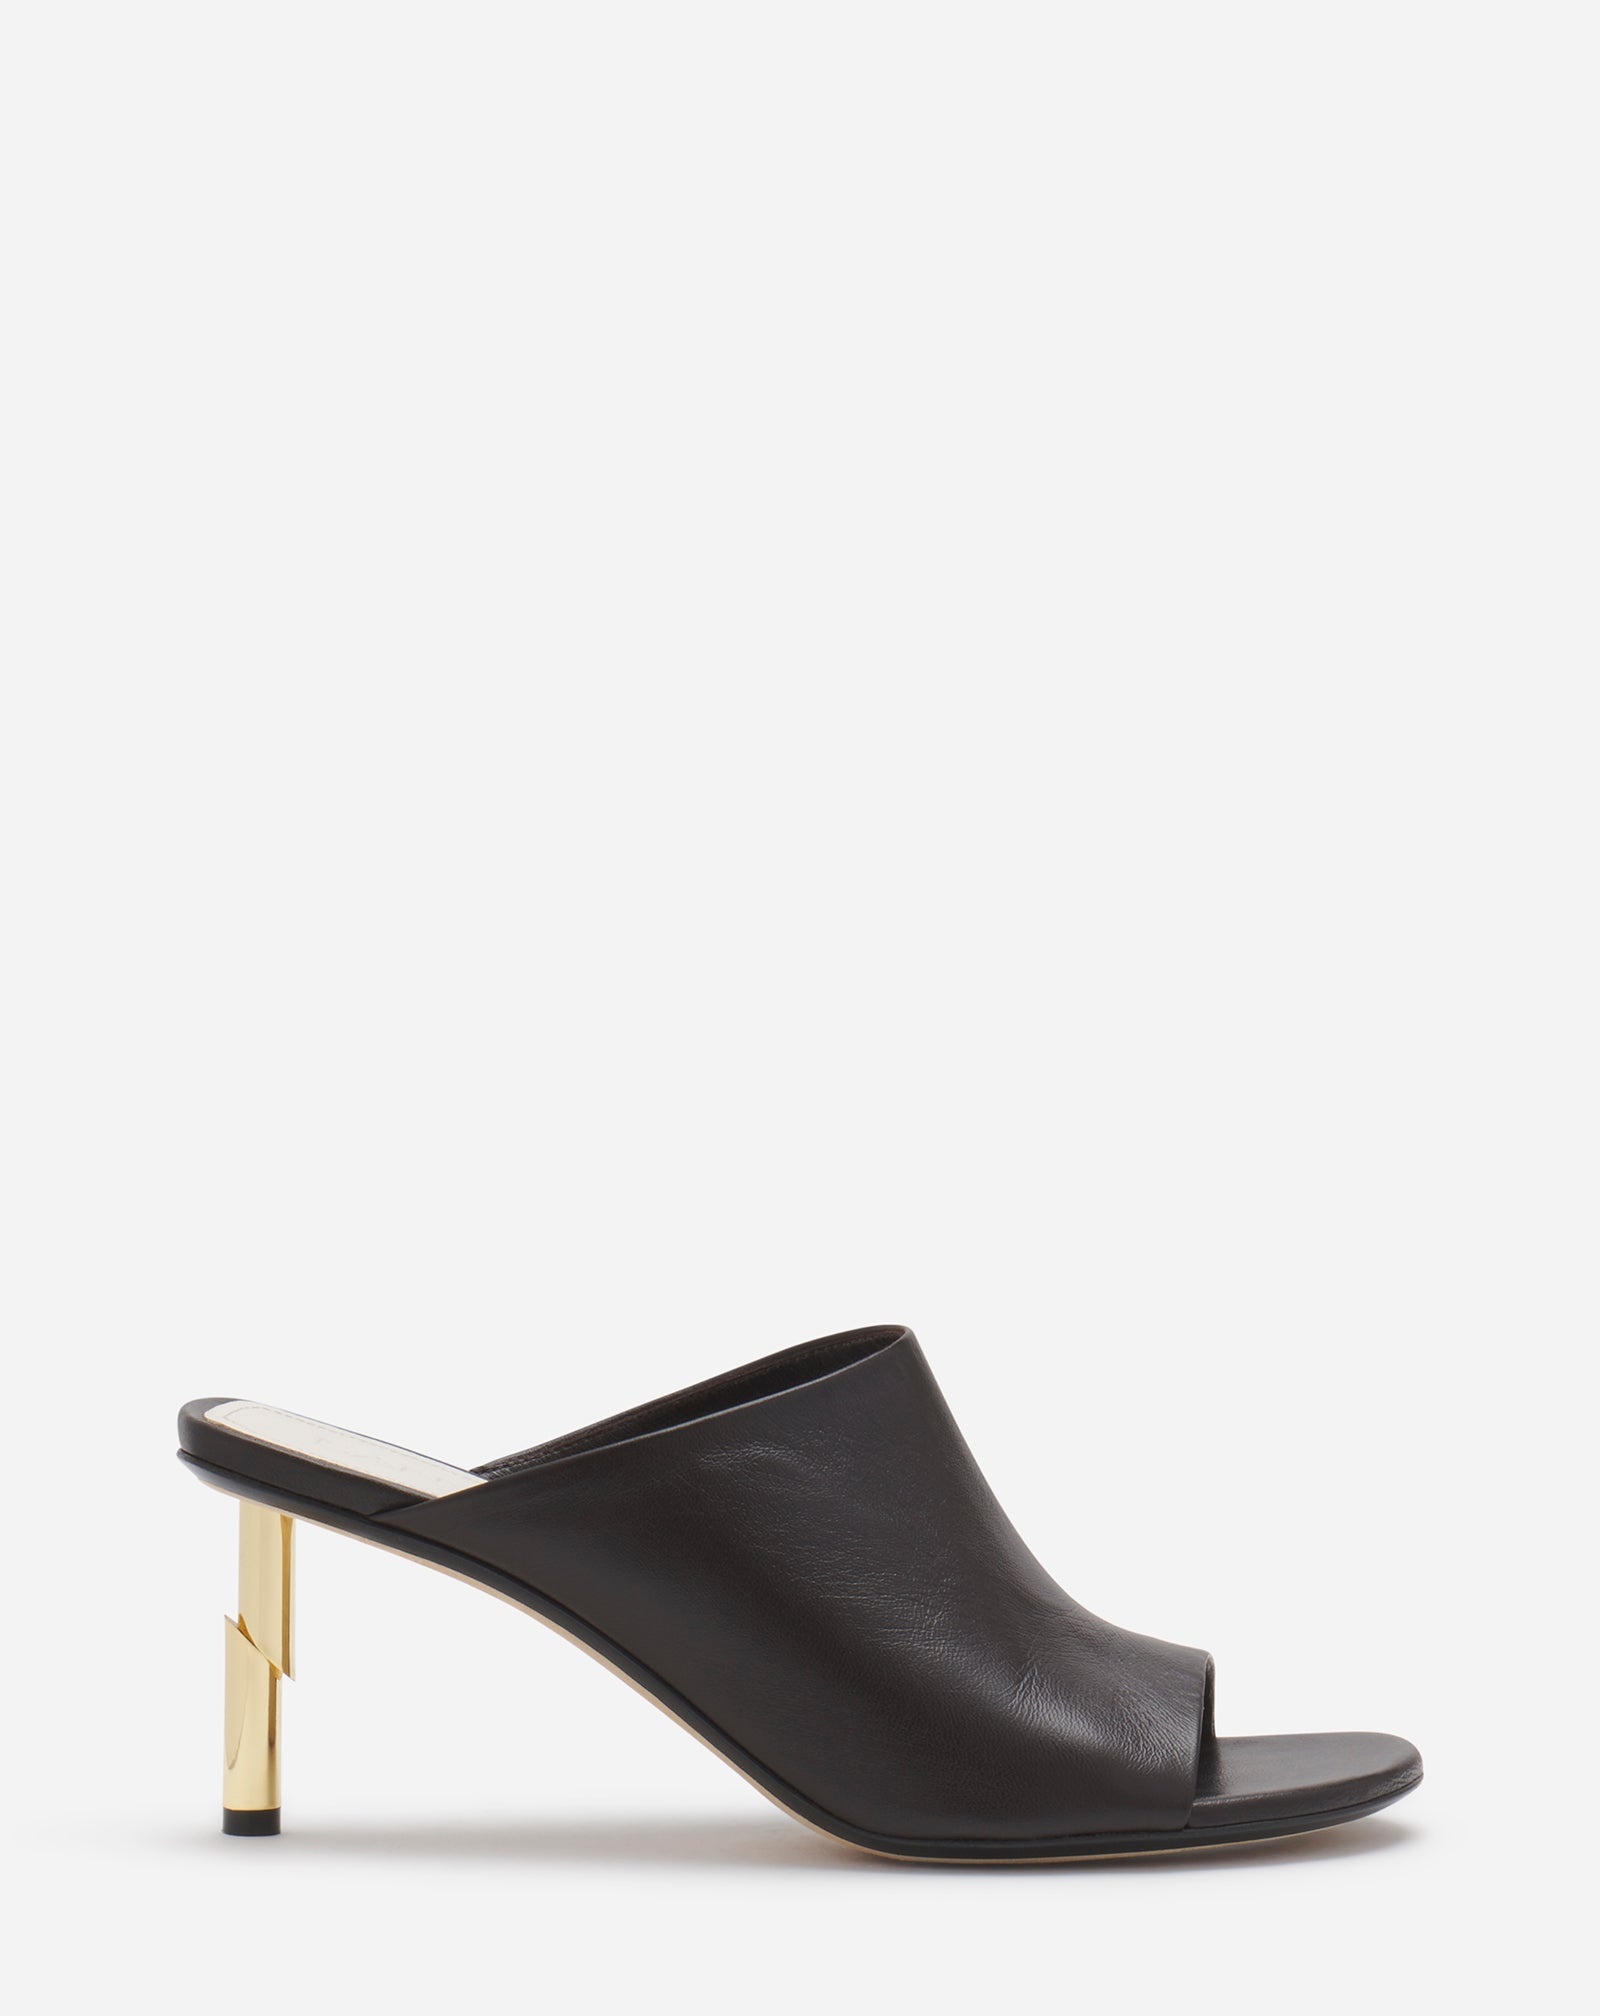 LEATHER SEQUENCE BY LANVIN MULES - 1